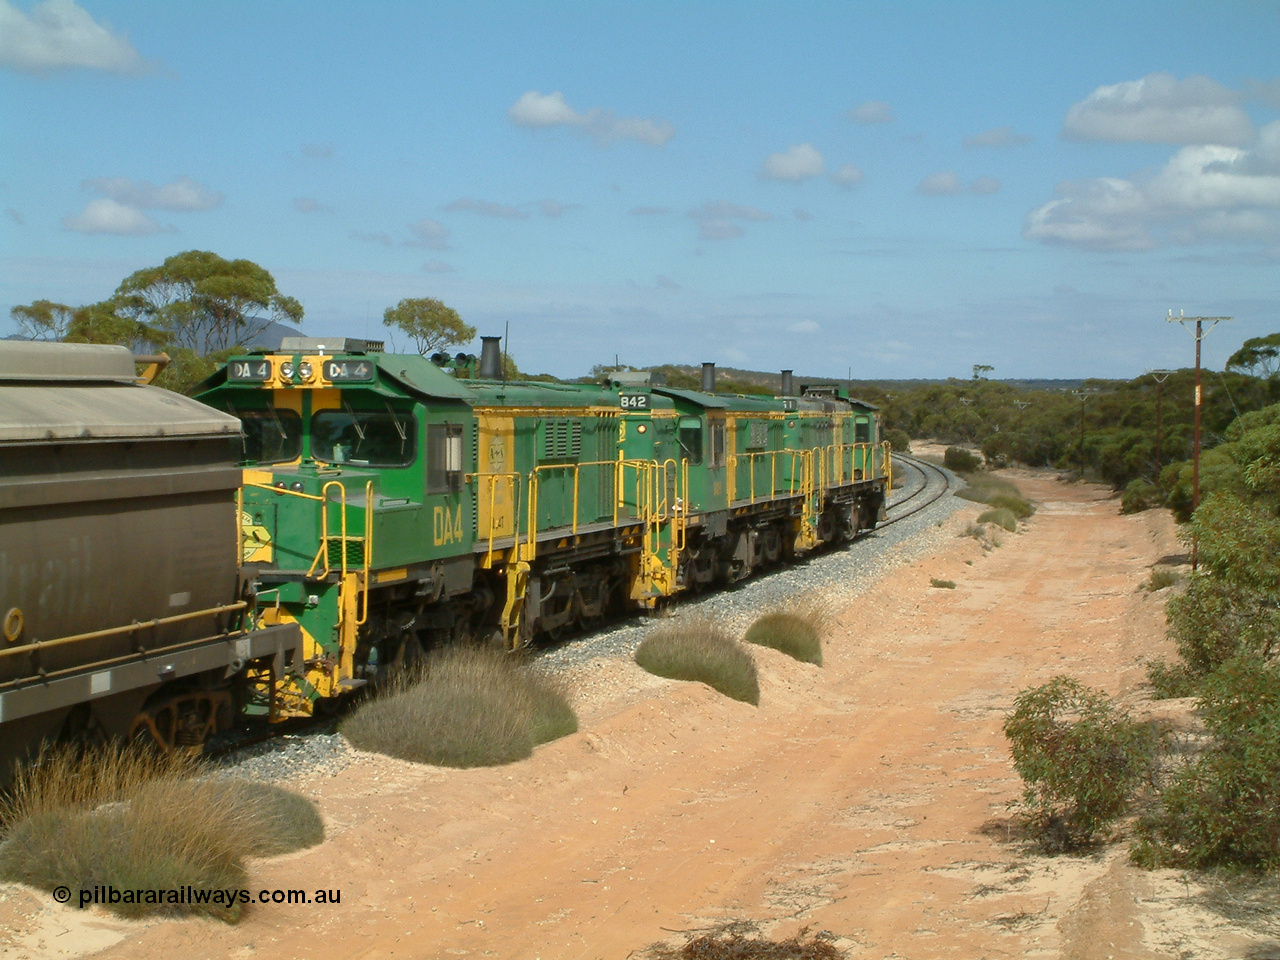 030409 110624
Caralue, loaded grain train working south of the former station site 830 class unit 851 AE Goodwin ALCo model DL531 serial 84137, 851 has spent its entire operating career on the Eyre Peninsula, it leads fellow 830 class 842 serial 84140 and a rebuilt unit DA 4, rebuilt from 830 class unit 839 by Port Augusta Workshops, retains original serial 83730 and model DL531.
Keywords: 830-class;851;84137;AE-Goodwin;ALCo;DL531;